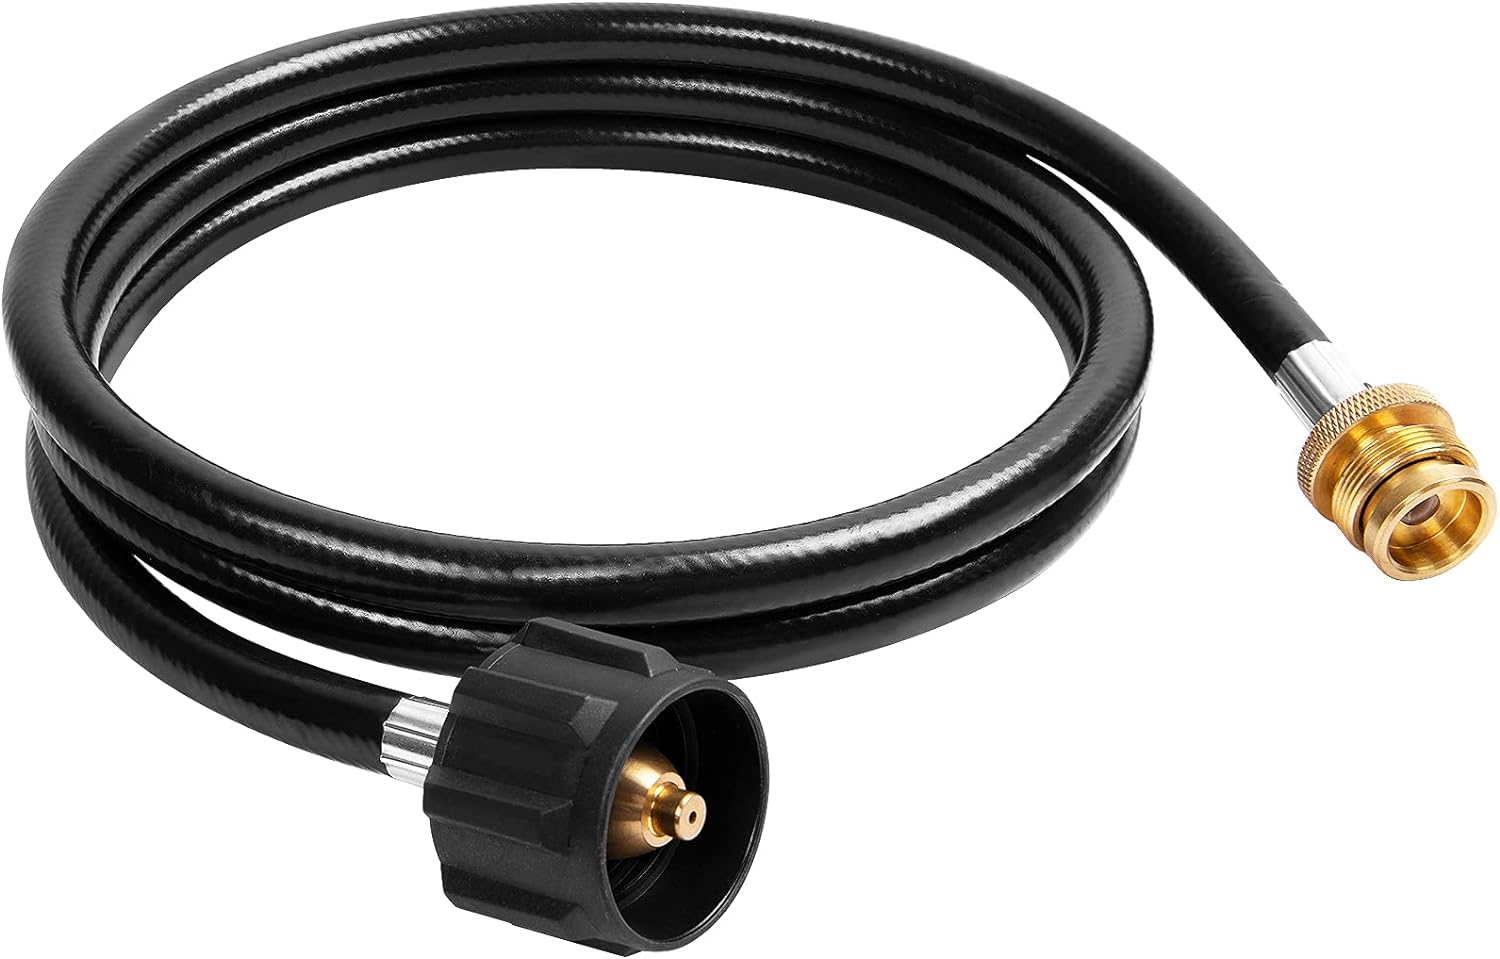 SHINESTAR 6FT Propane Adapter Hose - Compatible with Mr. Buddy Heater, Coleman Stove, Weber Q Grill  More - Connects 1lb Portable Appliances to 20lb Tanks - SHINESTAR 6FT Propane Adapter Hose Review